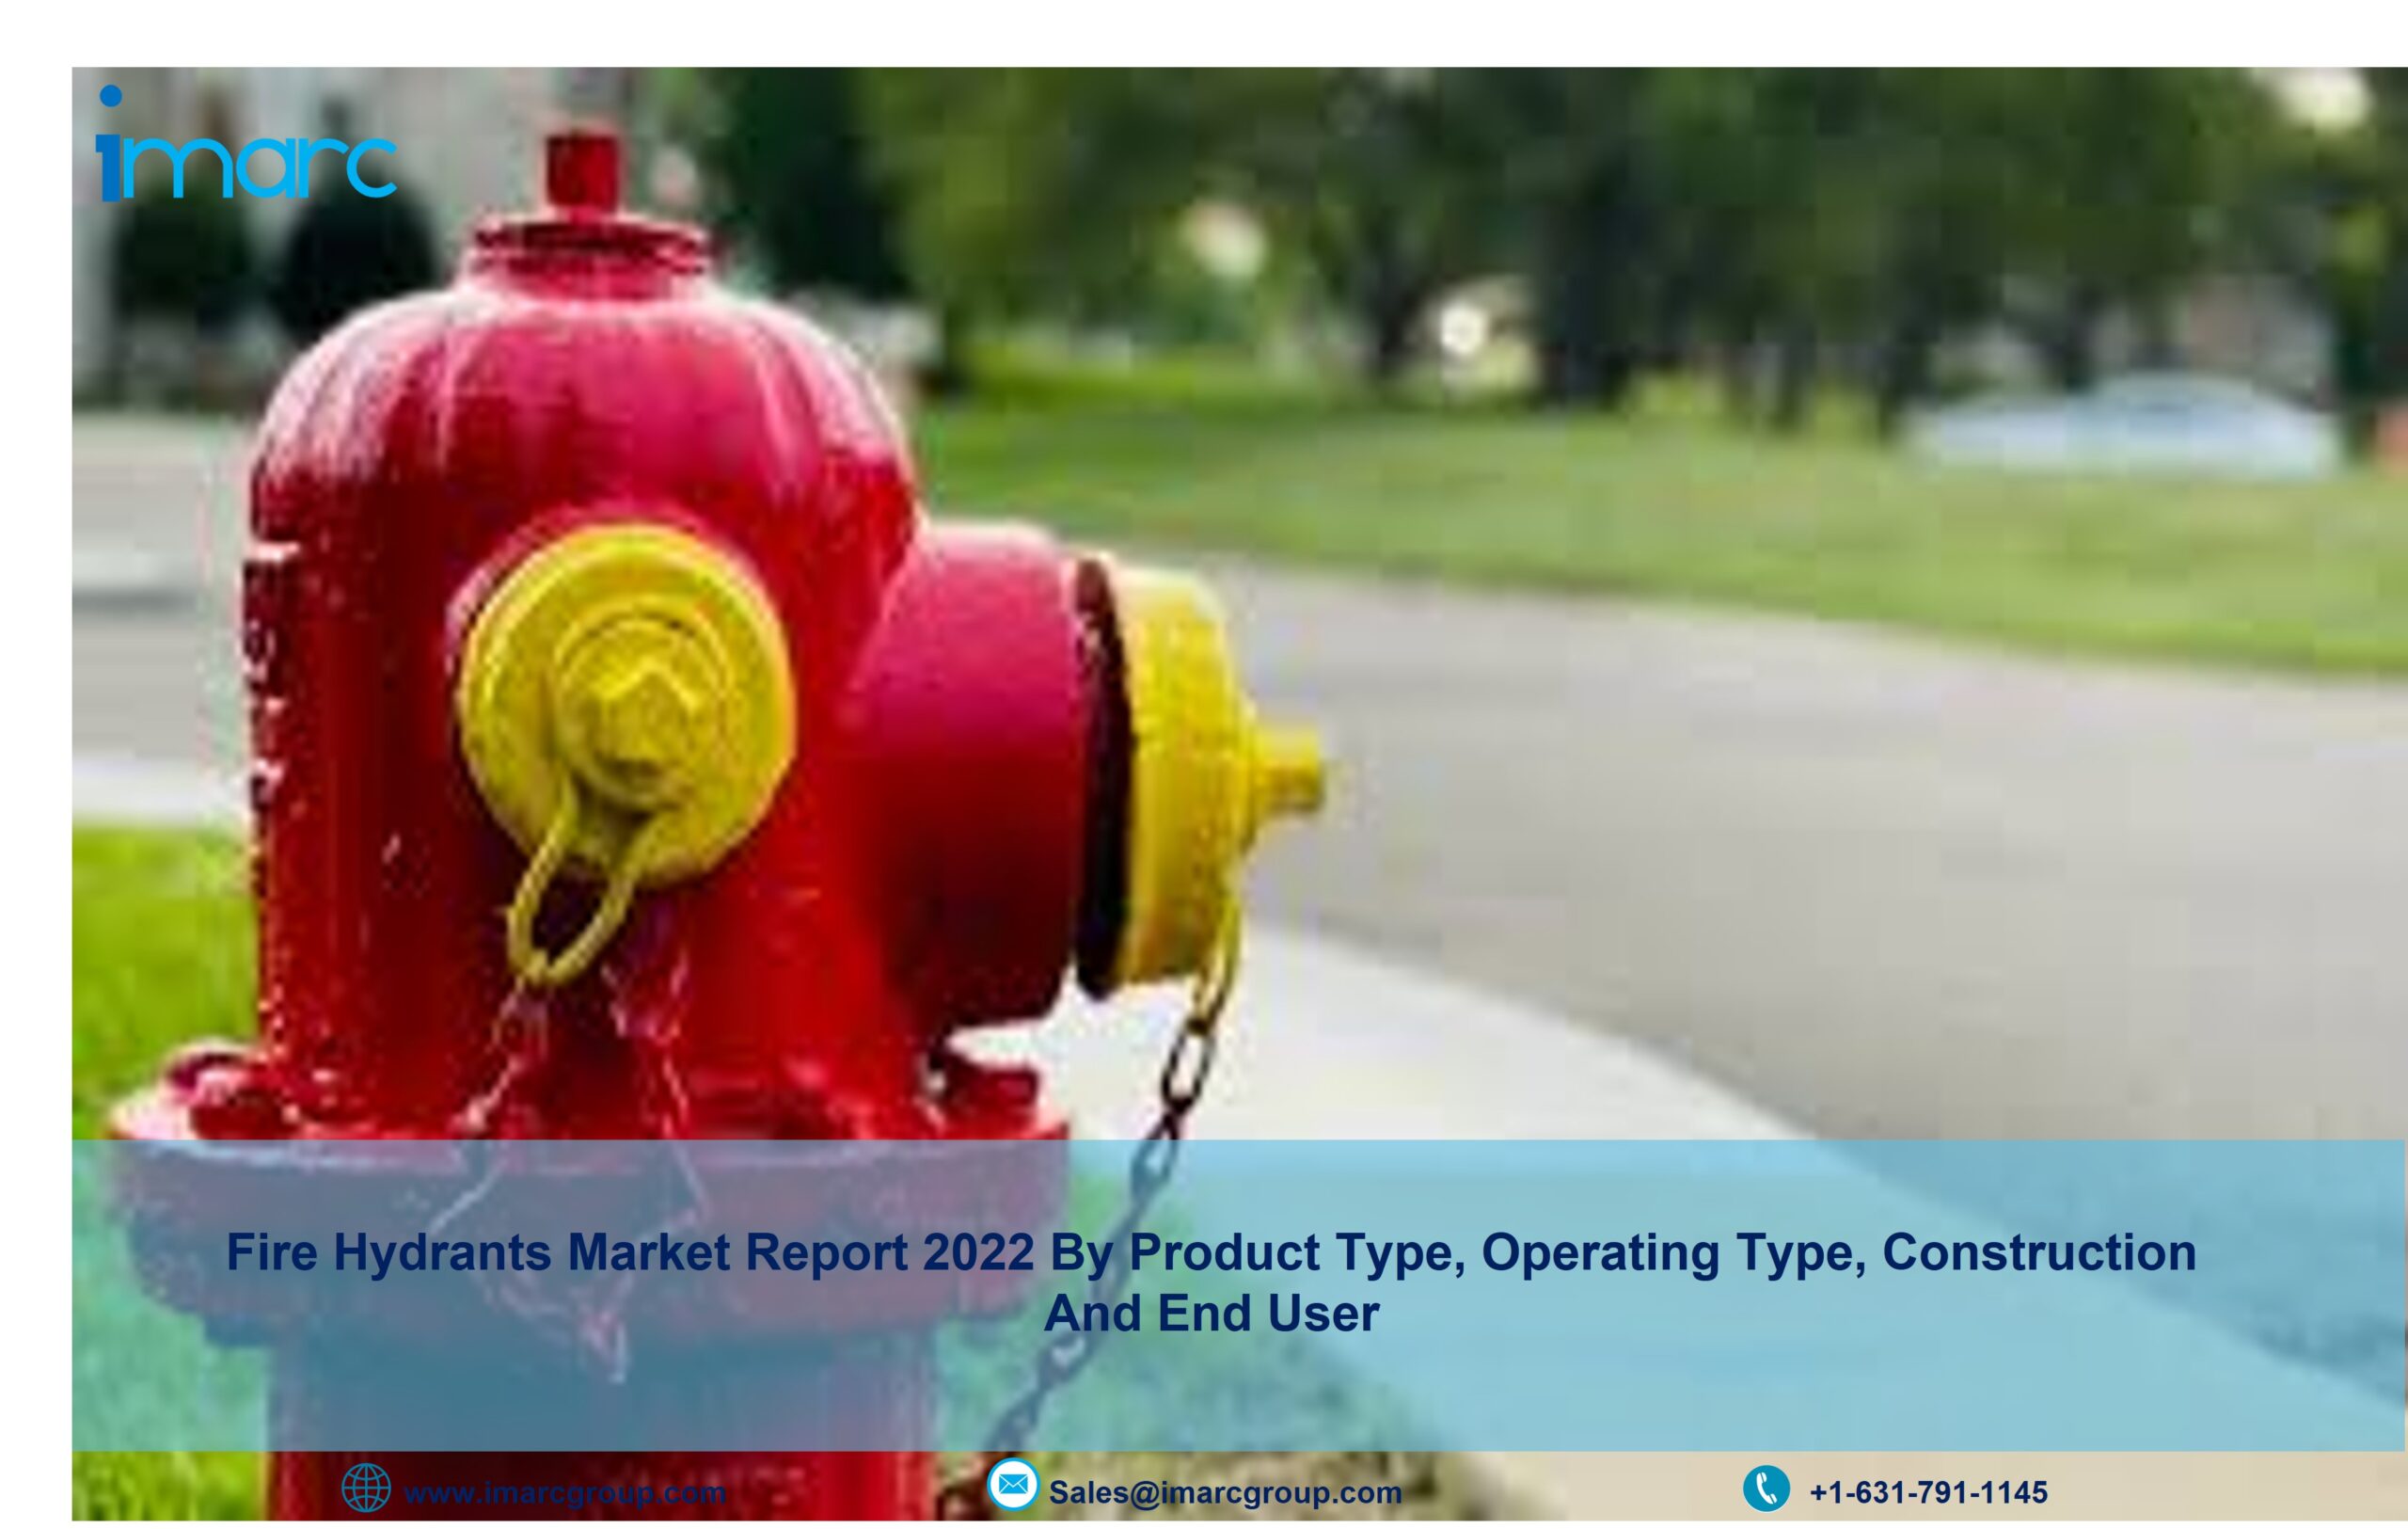 Fire Hydrants Market to Reach US$ 1.63 Billion by 2027 | IMARC Group 1